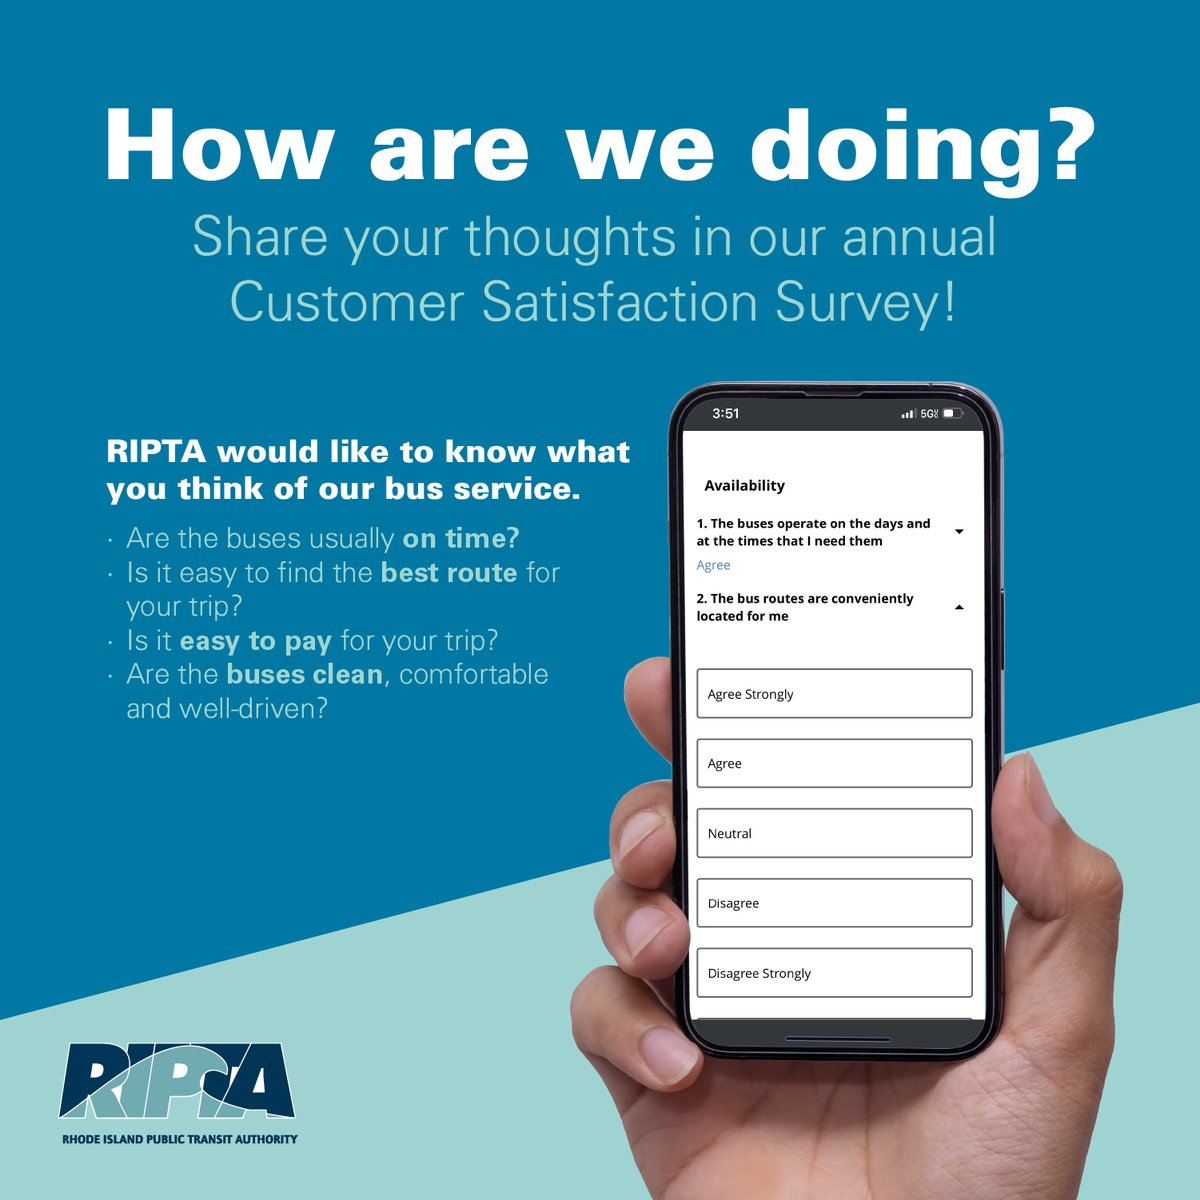 RIPTA would like to know what YOU think of our bus service: • Are the buses usually on time? • Is it easy to pay for your trip? • Are the buses clean, comfortable and well-driven? Visit RIPTA.com/survey before May 5 to share your feedback!